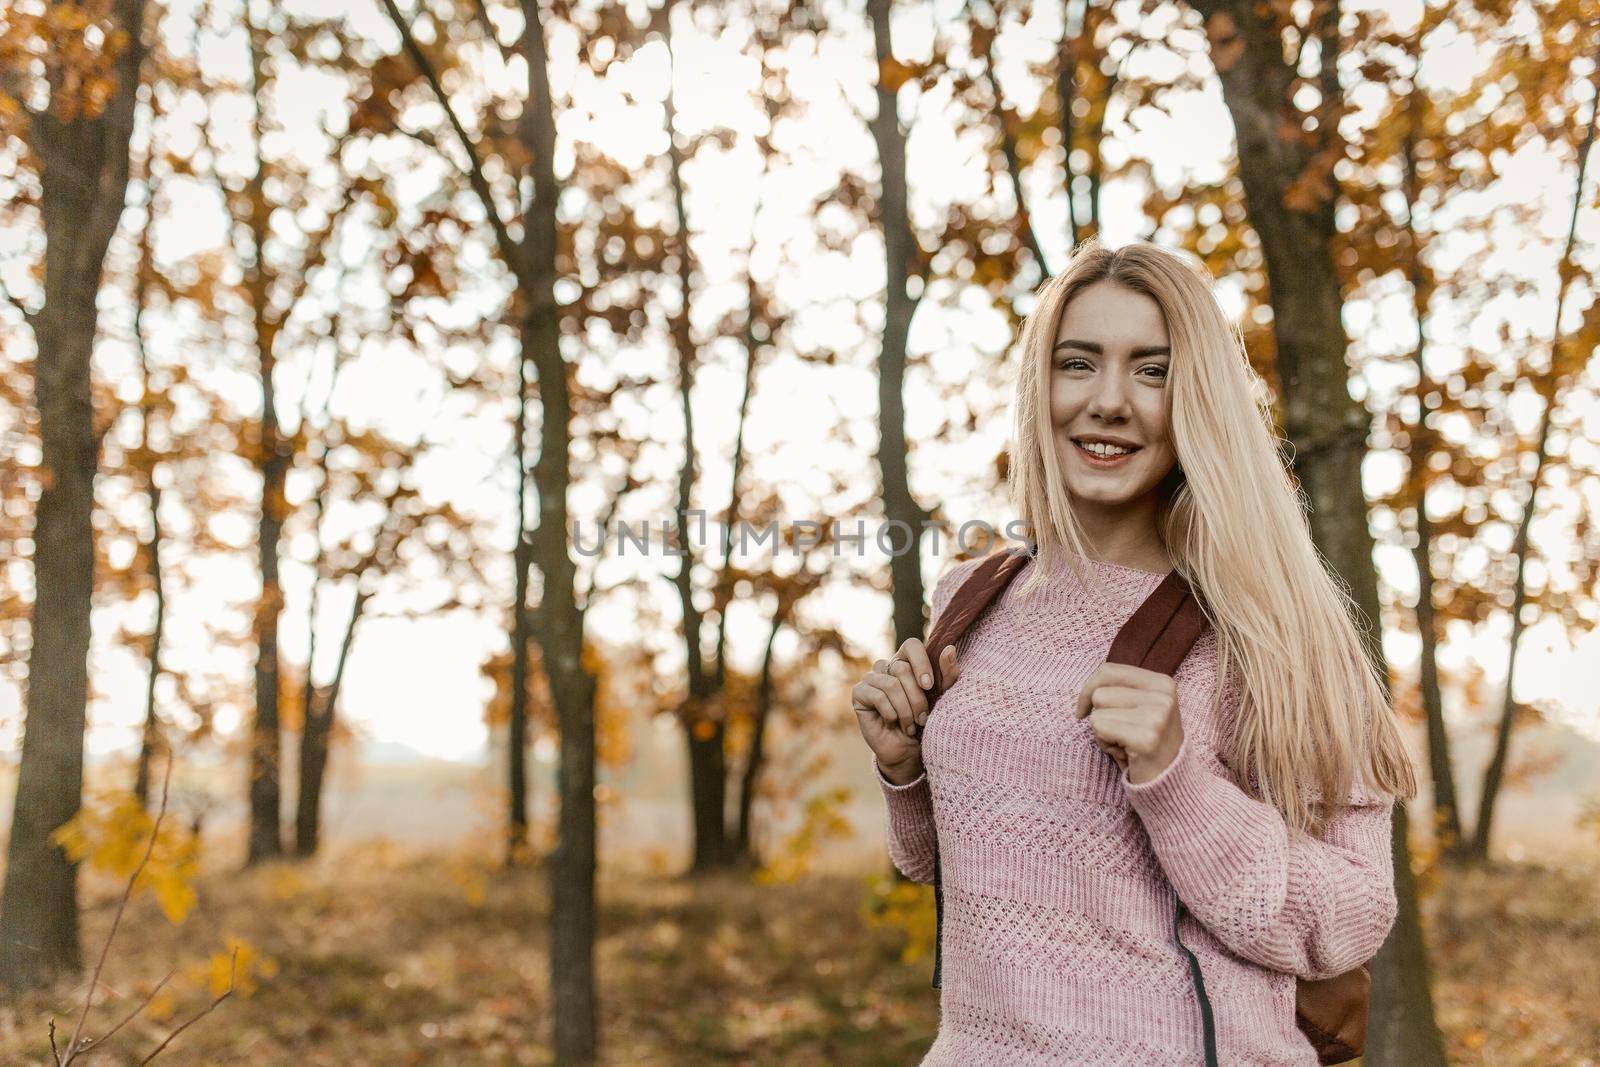 Young Female Traveler Posing On Background Of Autumn Forest Outdoors, Charming Blonde With Backpack Stopped Looking At Camera, Autumn Trees With Yellow Leaves On Sunny Blurry Background